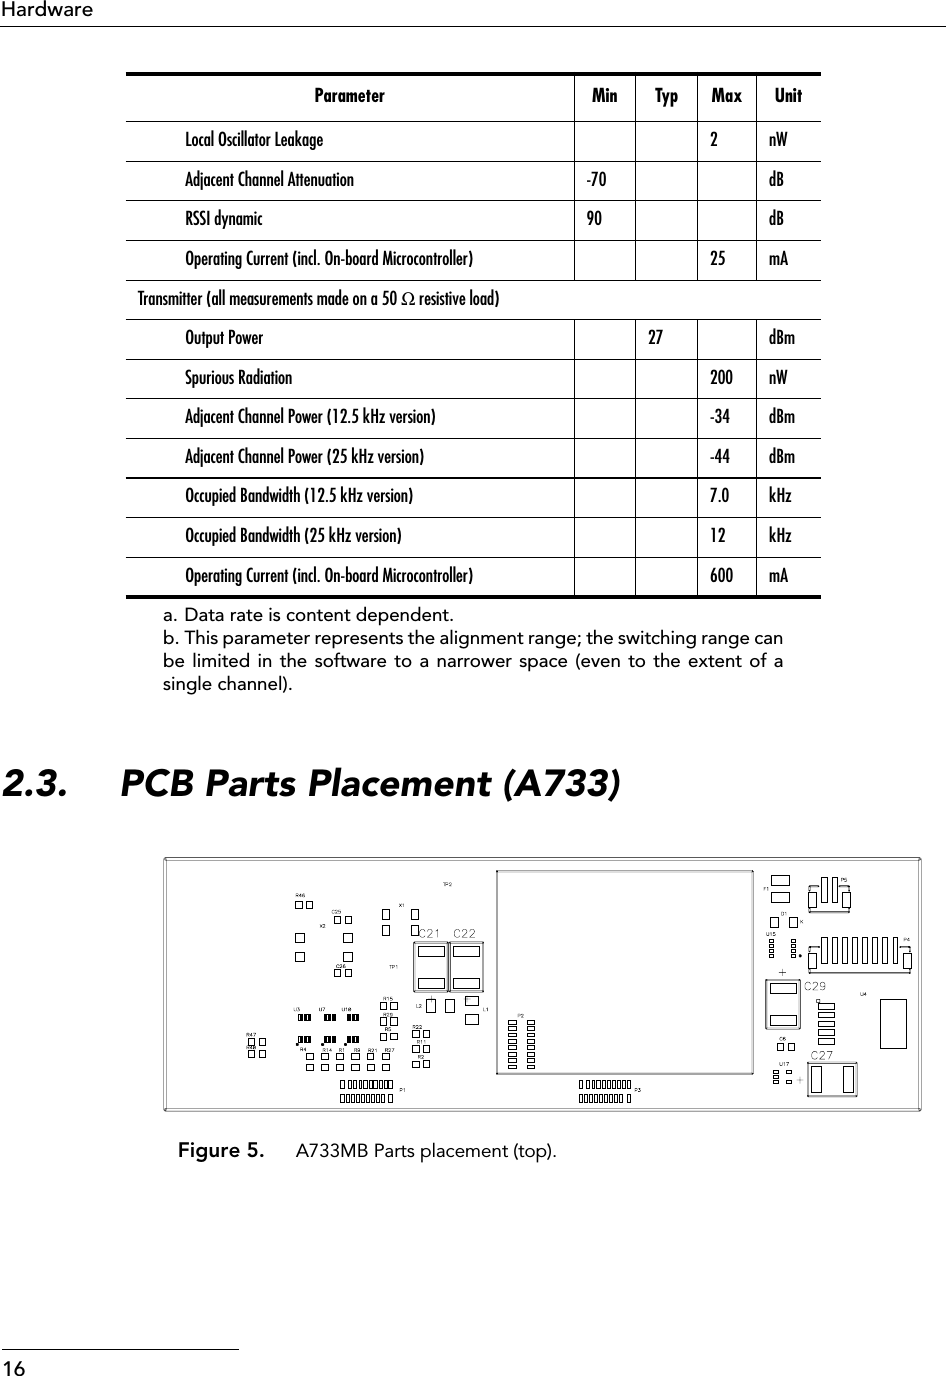  16Hardware 2.3. PCB Parts Placement (A733) Figure 5. A733MB Parts placement (top). Local Oscillator Leakage 2 nWAdjacent Channel Attenuation -70 dBRSSI dynamic 90 dBOperating Current (incl. On-board Microcontroller) 25 mATransmitter (all measurements made on a 50  Ω  resistive load)Output Power 27 dBmSpurious Radiation 200 nWAdjacent Channel Power (12.5 kHz version) -34 dBmAdjacent Channel Power (25 kHz version) -44 dBmOccupied Bandwidth (12.5 kHz version) 7.0 kHzOccupied Bandwidth (25 kHz version) 12 kHzOperating Current (incl. On-board Microcontroller) 600 mA a. Data rate is content dependent.b. This parameter represents the alignment range; the switching range canbe limited in the software to a narrower space (even to the extent of asingle channel). Parameter Min Typ Max Unit